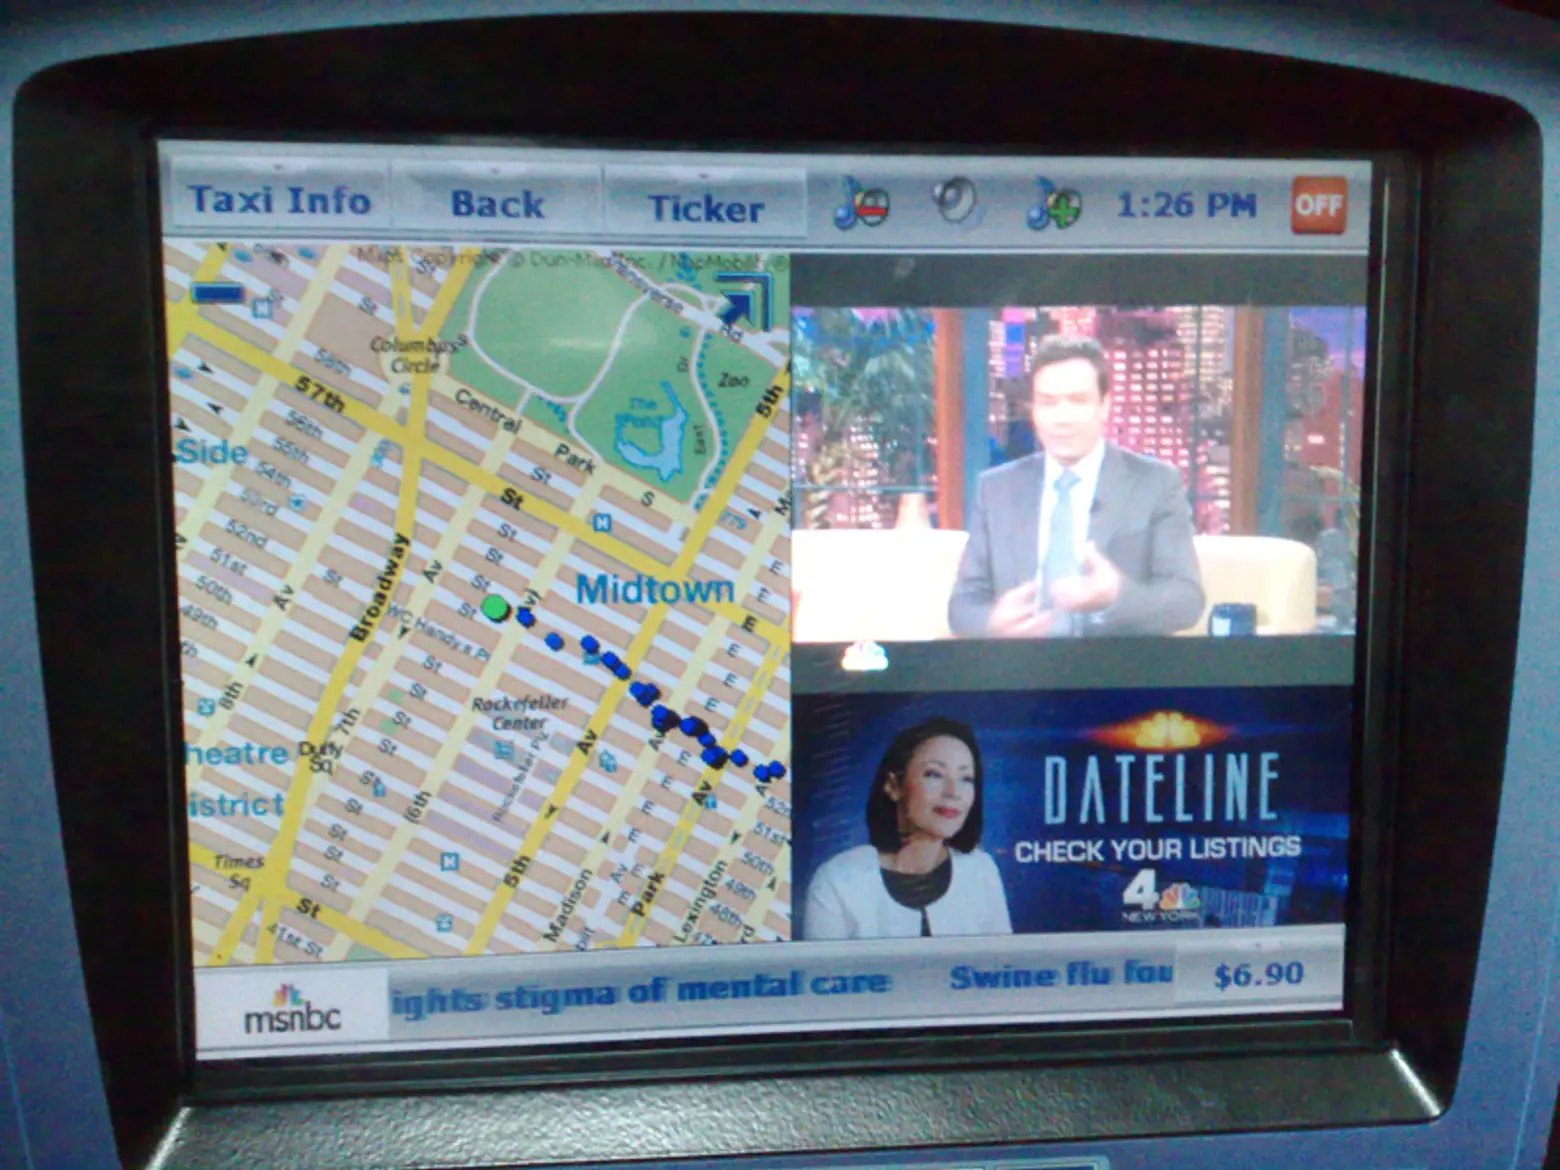 We May Soon Be Free of Those Horrid Taxi TV Screens